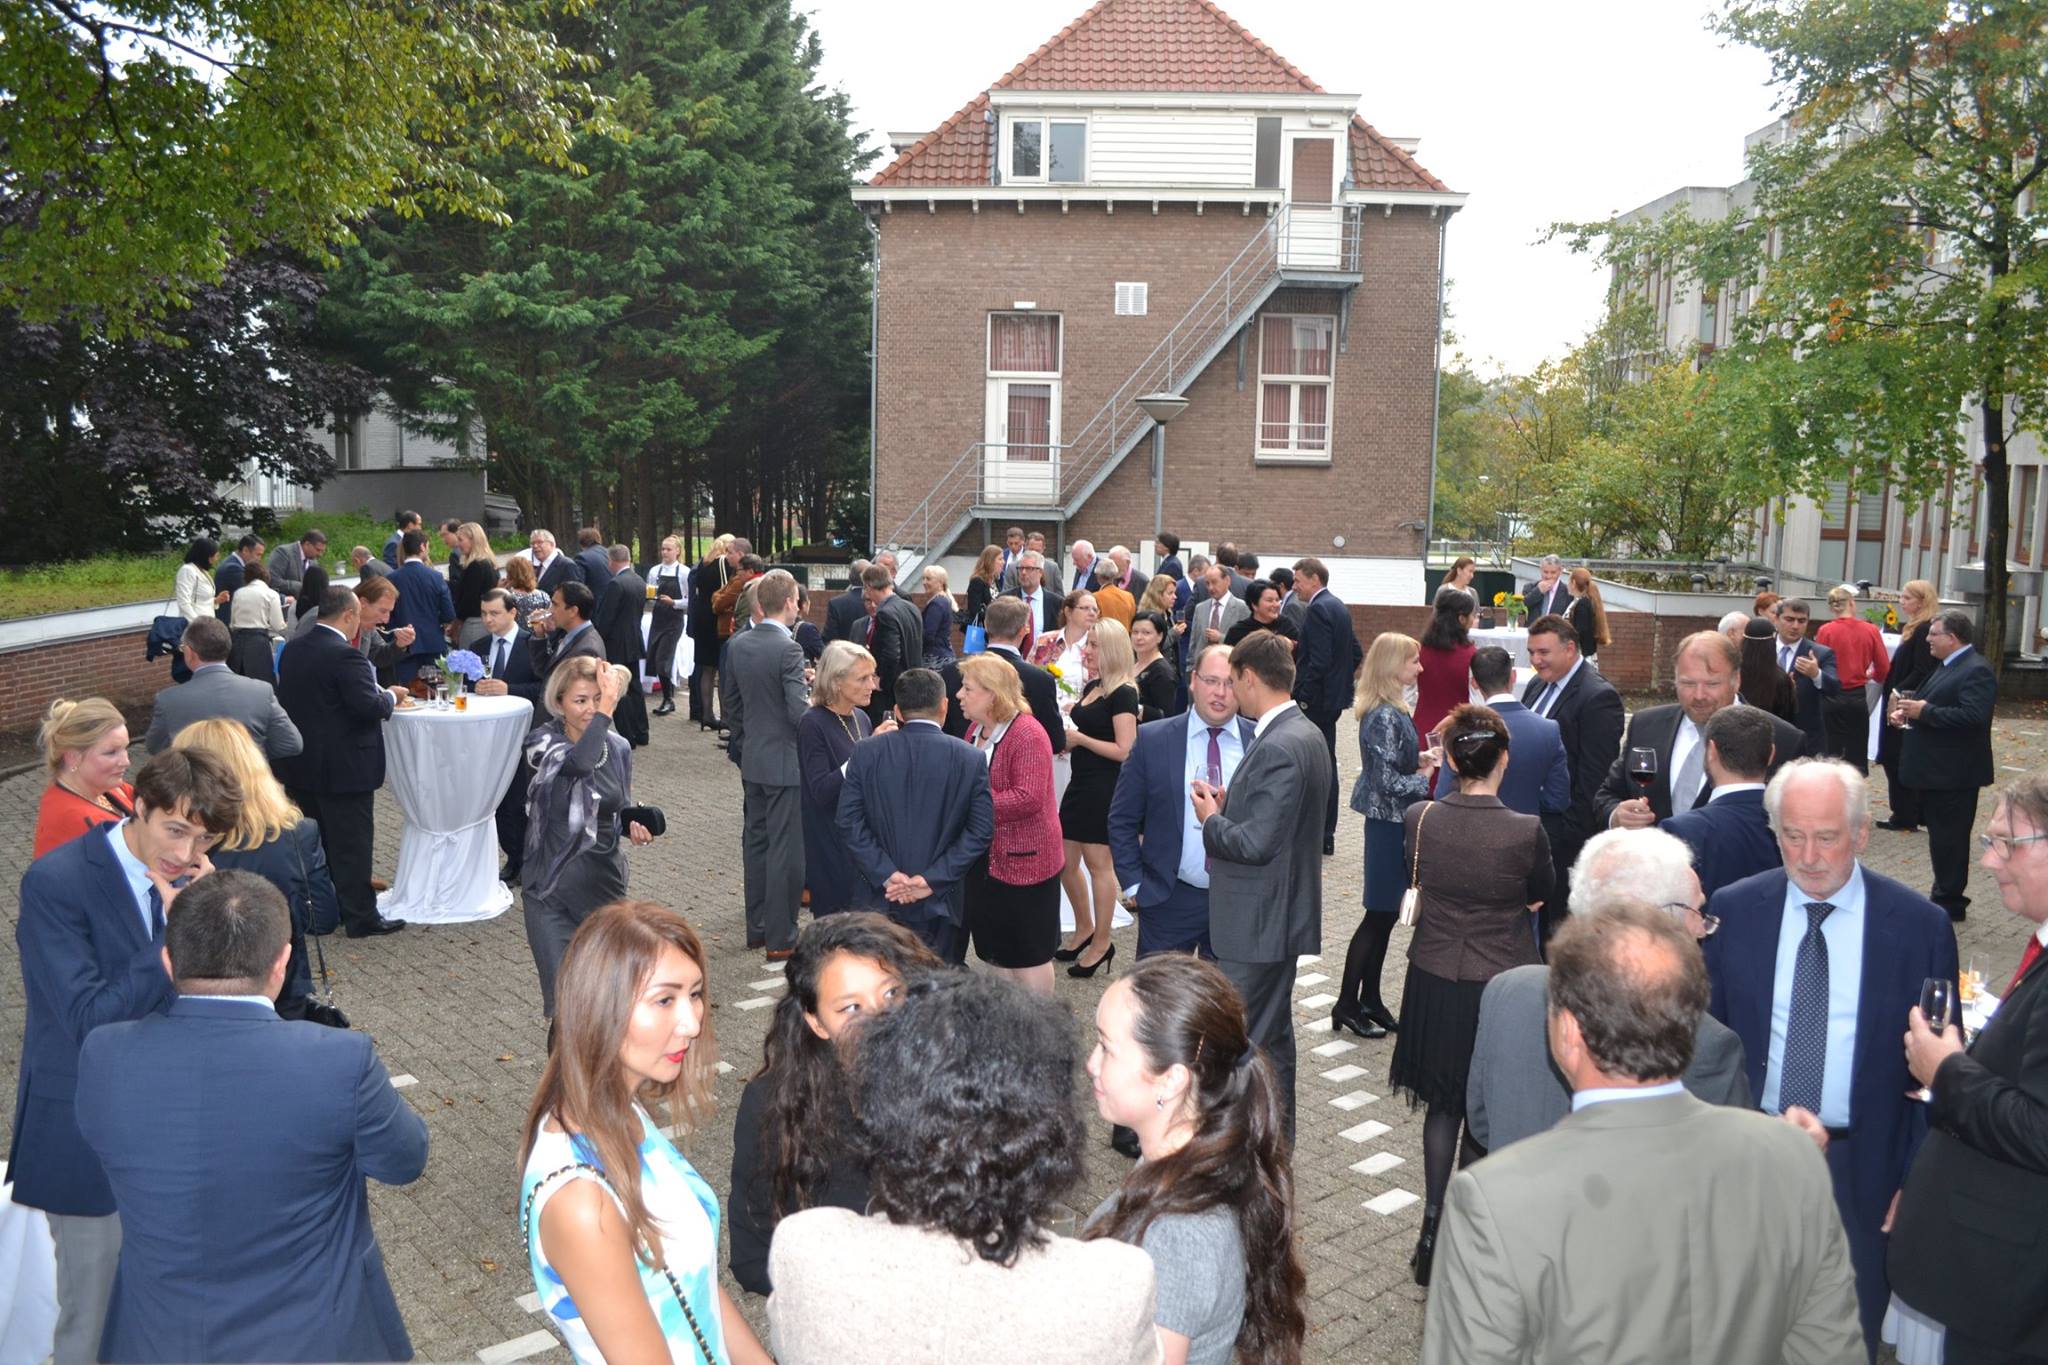 Catering Service at The Embassy of the Republic of Kazakhstan in The Hague